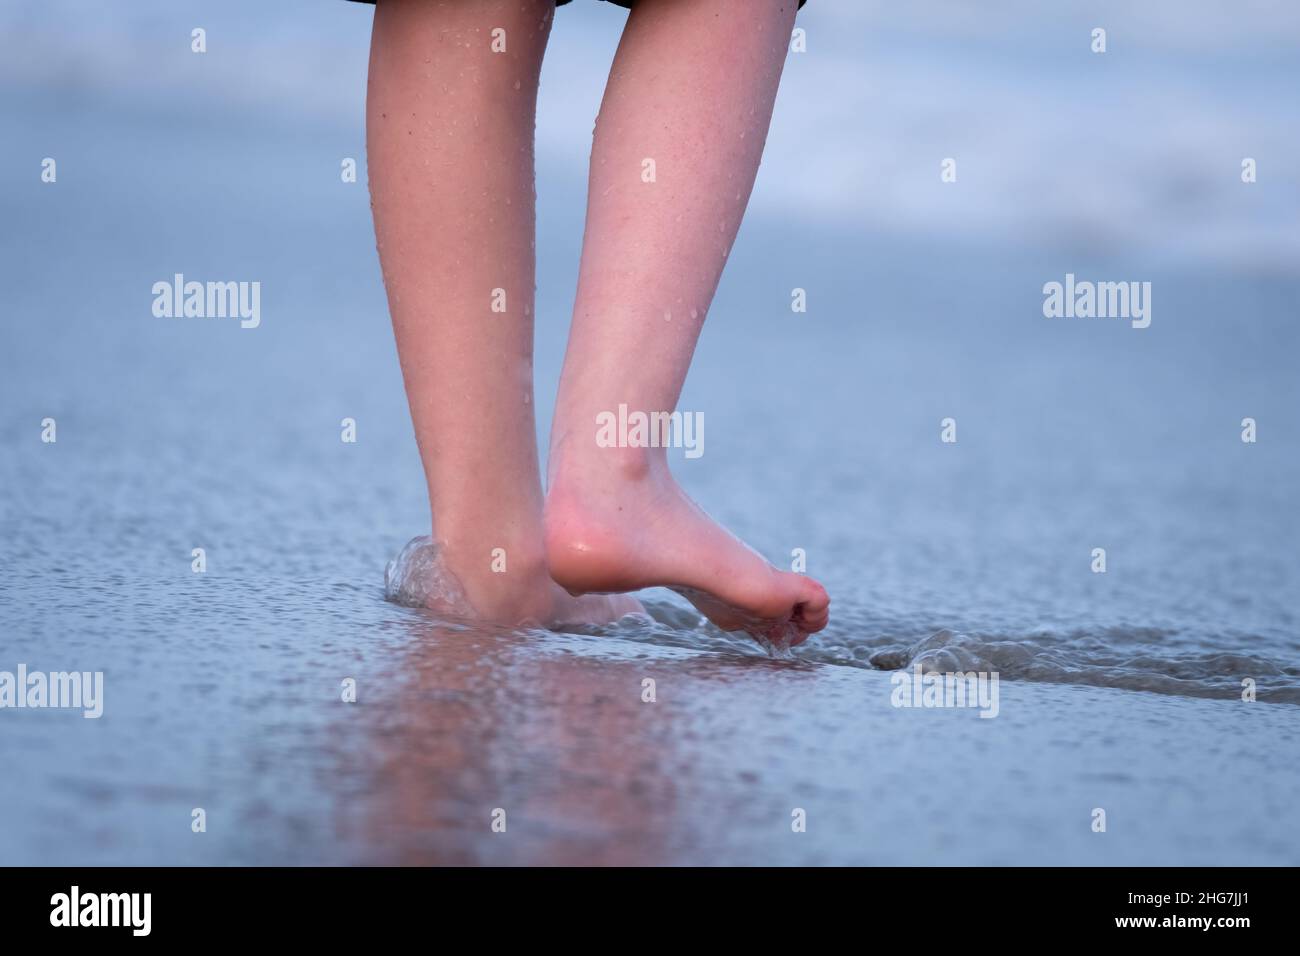 A child feels her feet sink in the sand as the water withdraws at the beach. Emerald Isle, NC. Stock Photo